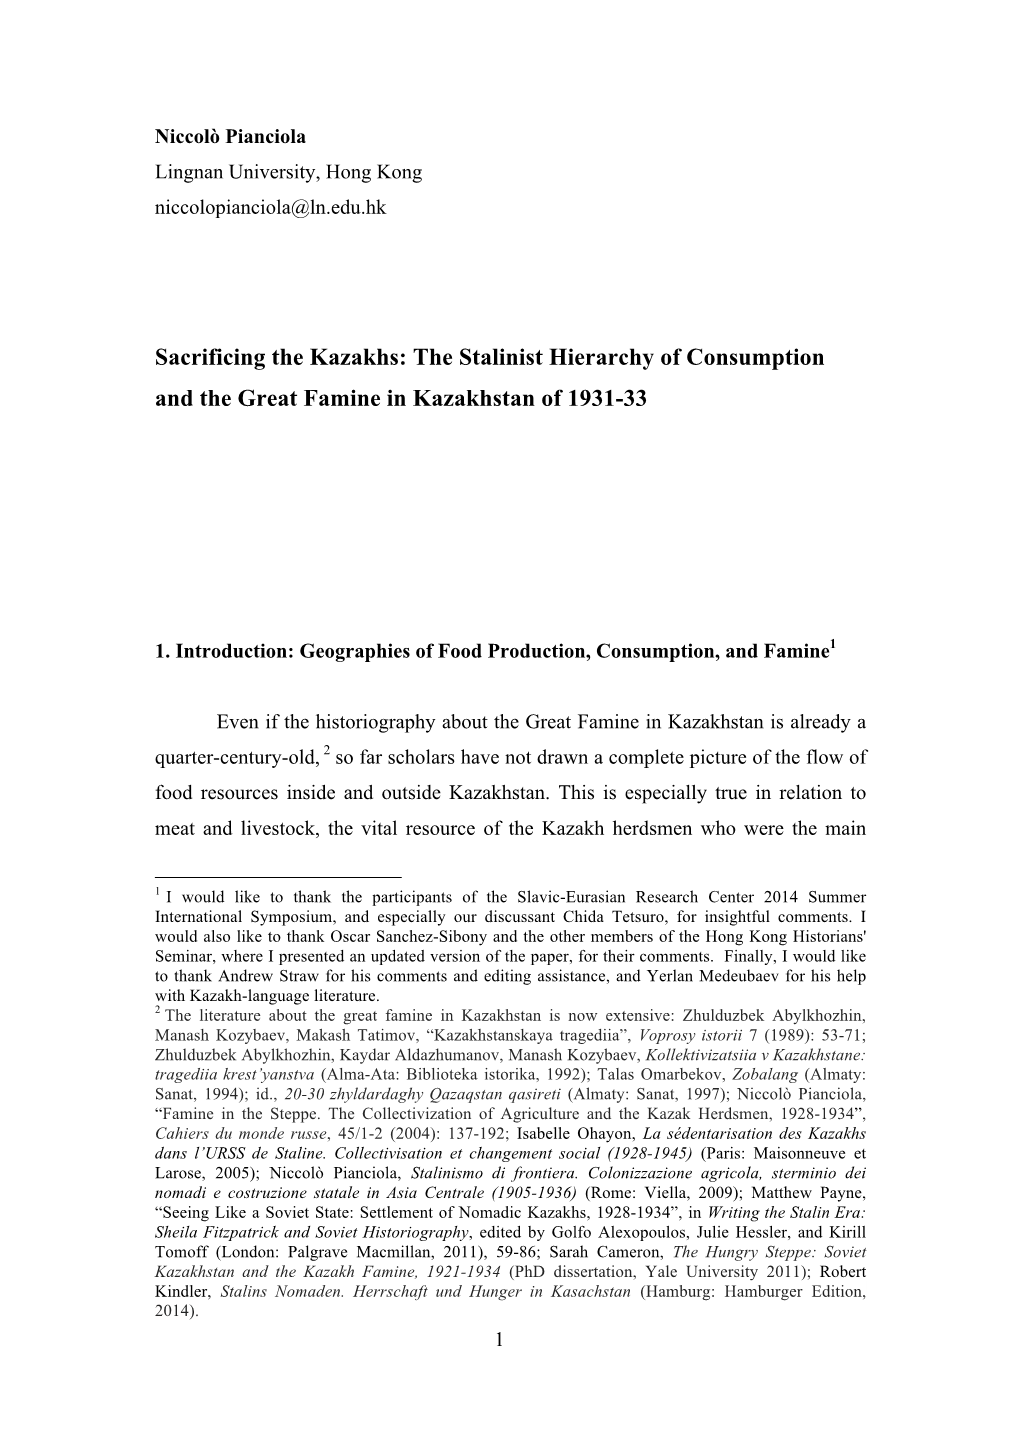 Sacrificing the Kazakhs: the Stalinist Hierarchy of Consumption and the Great Famine in Kazakhstan of 1931-33